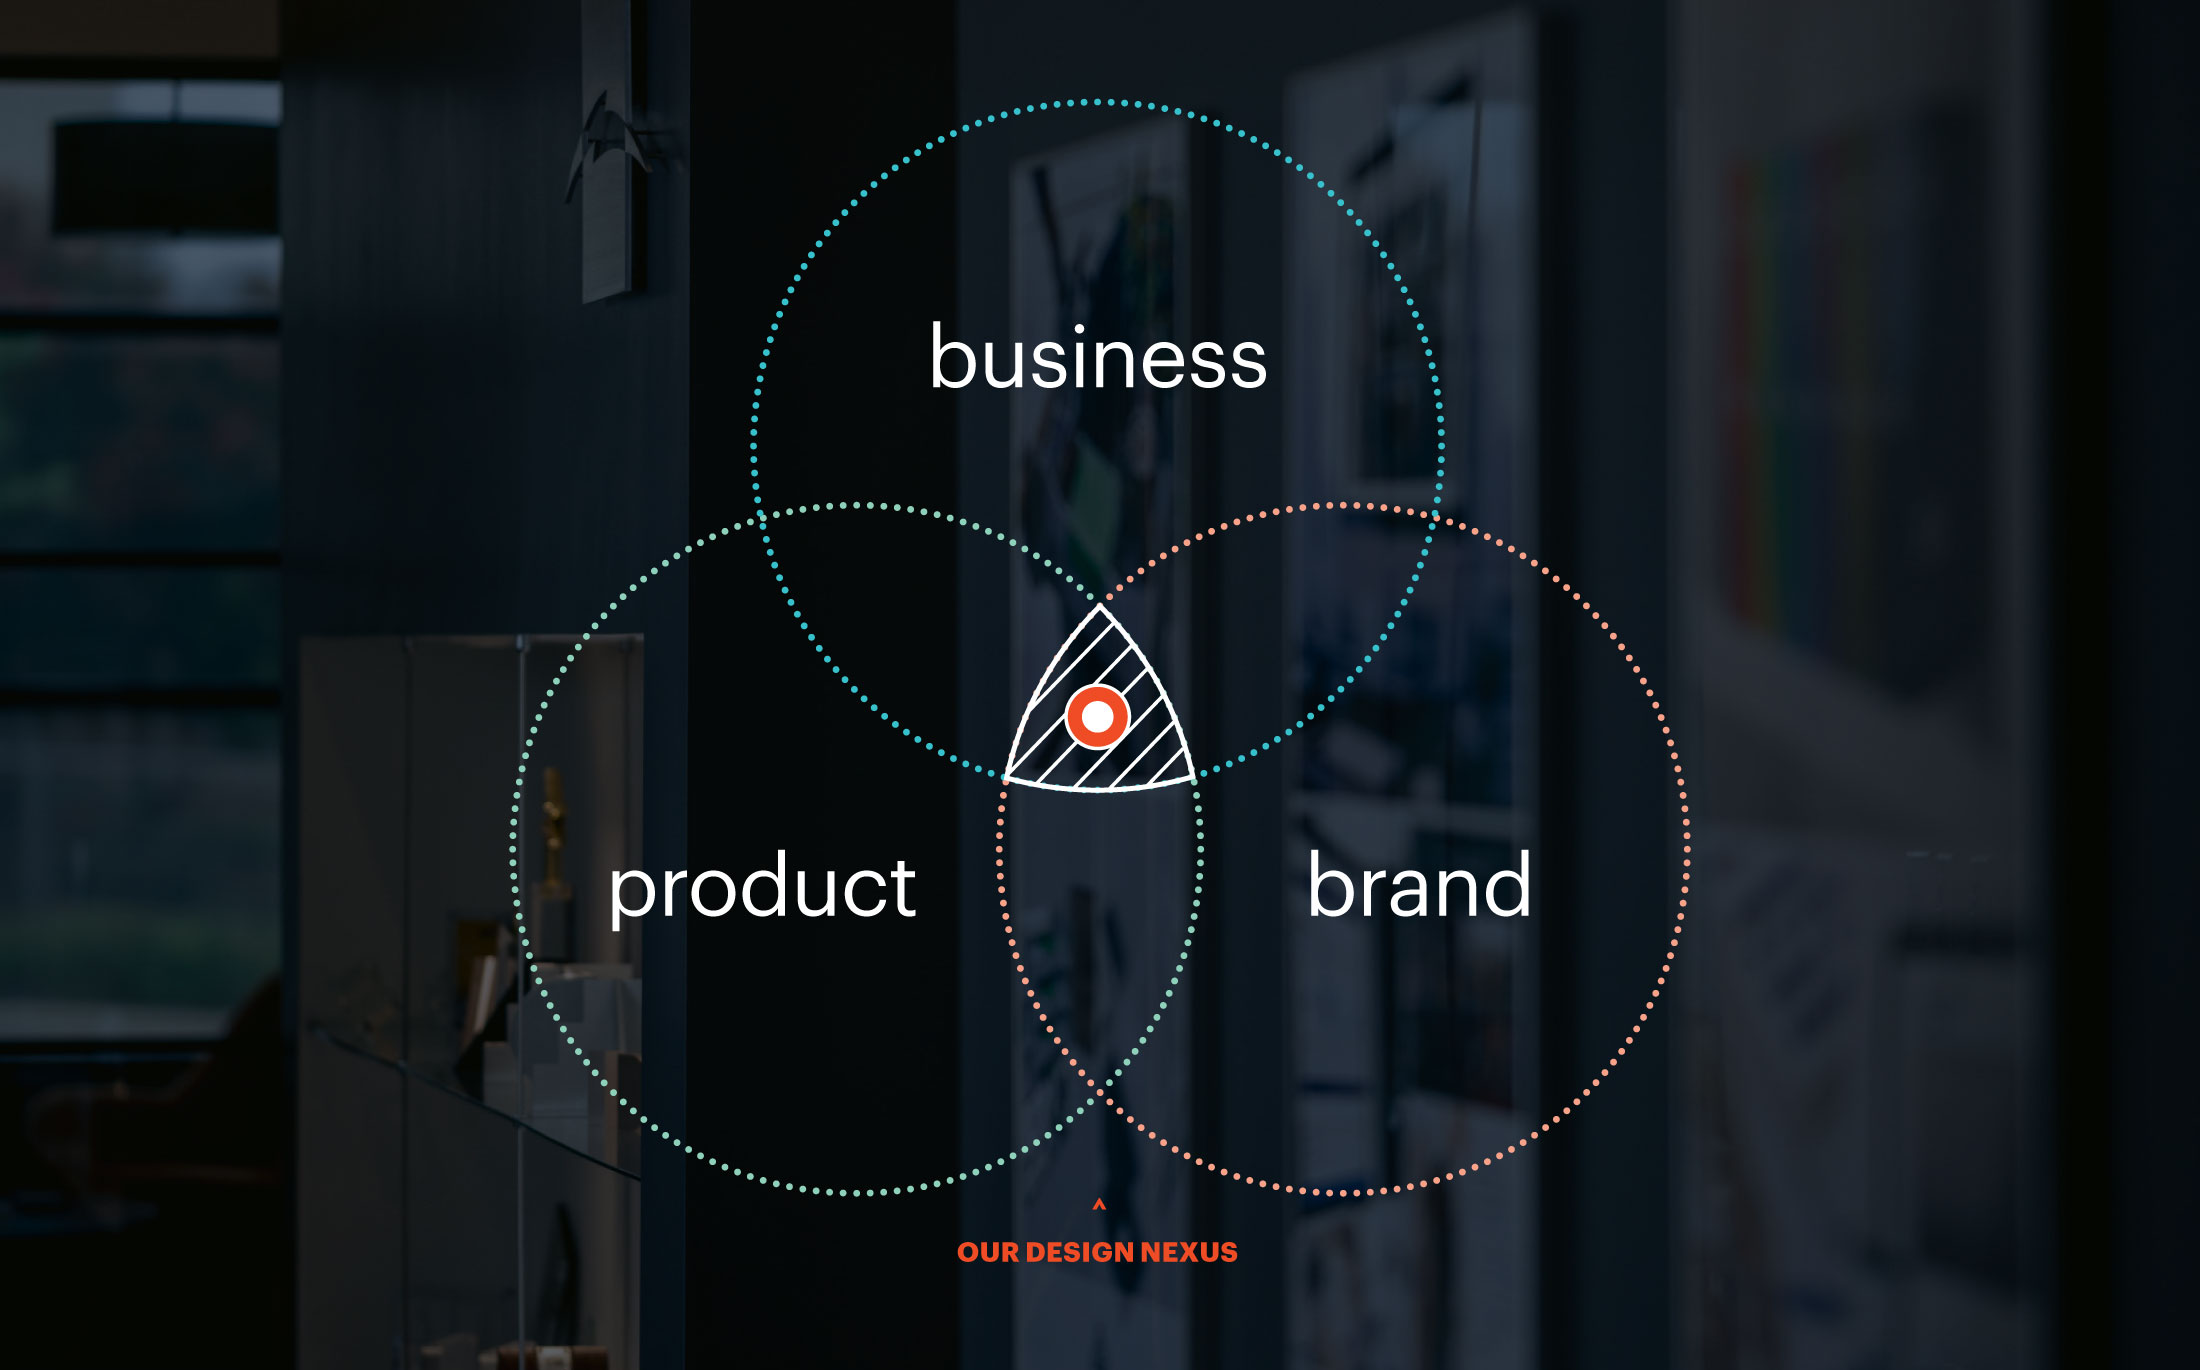 Venn diagram showing the intersection of product, brand and business